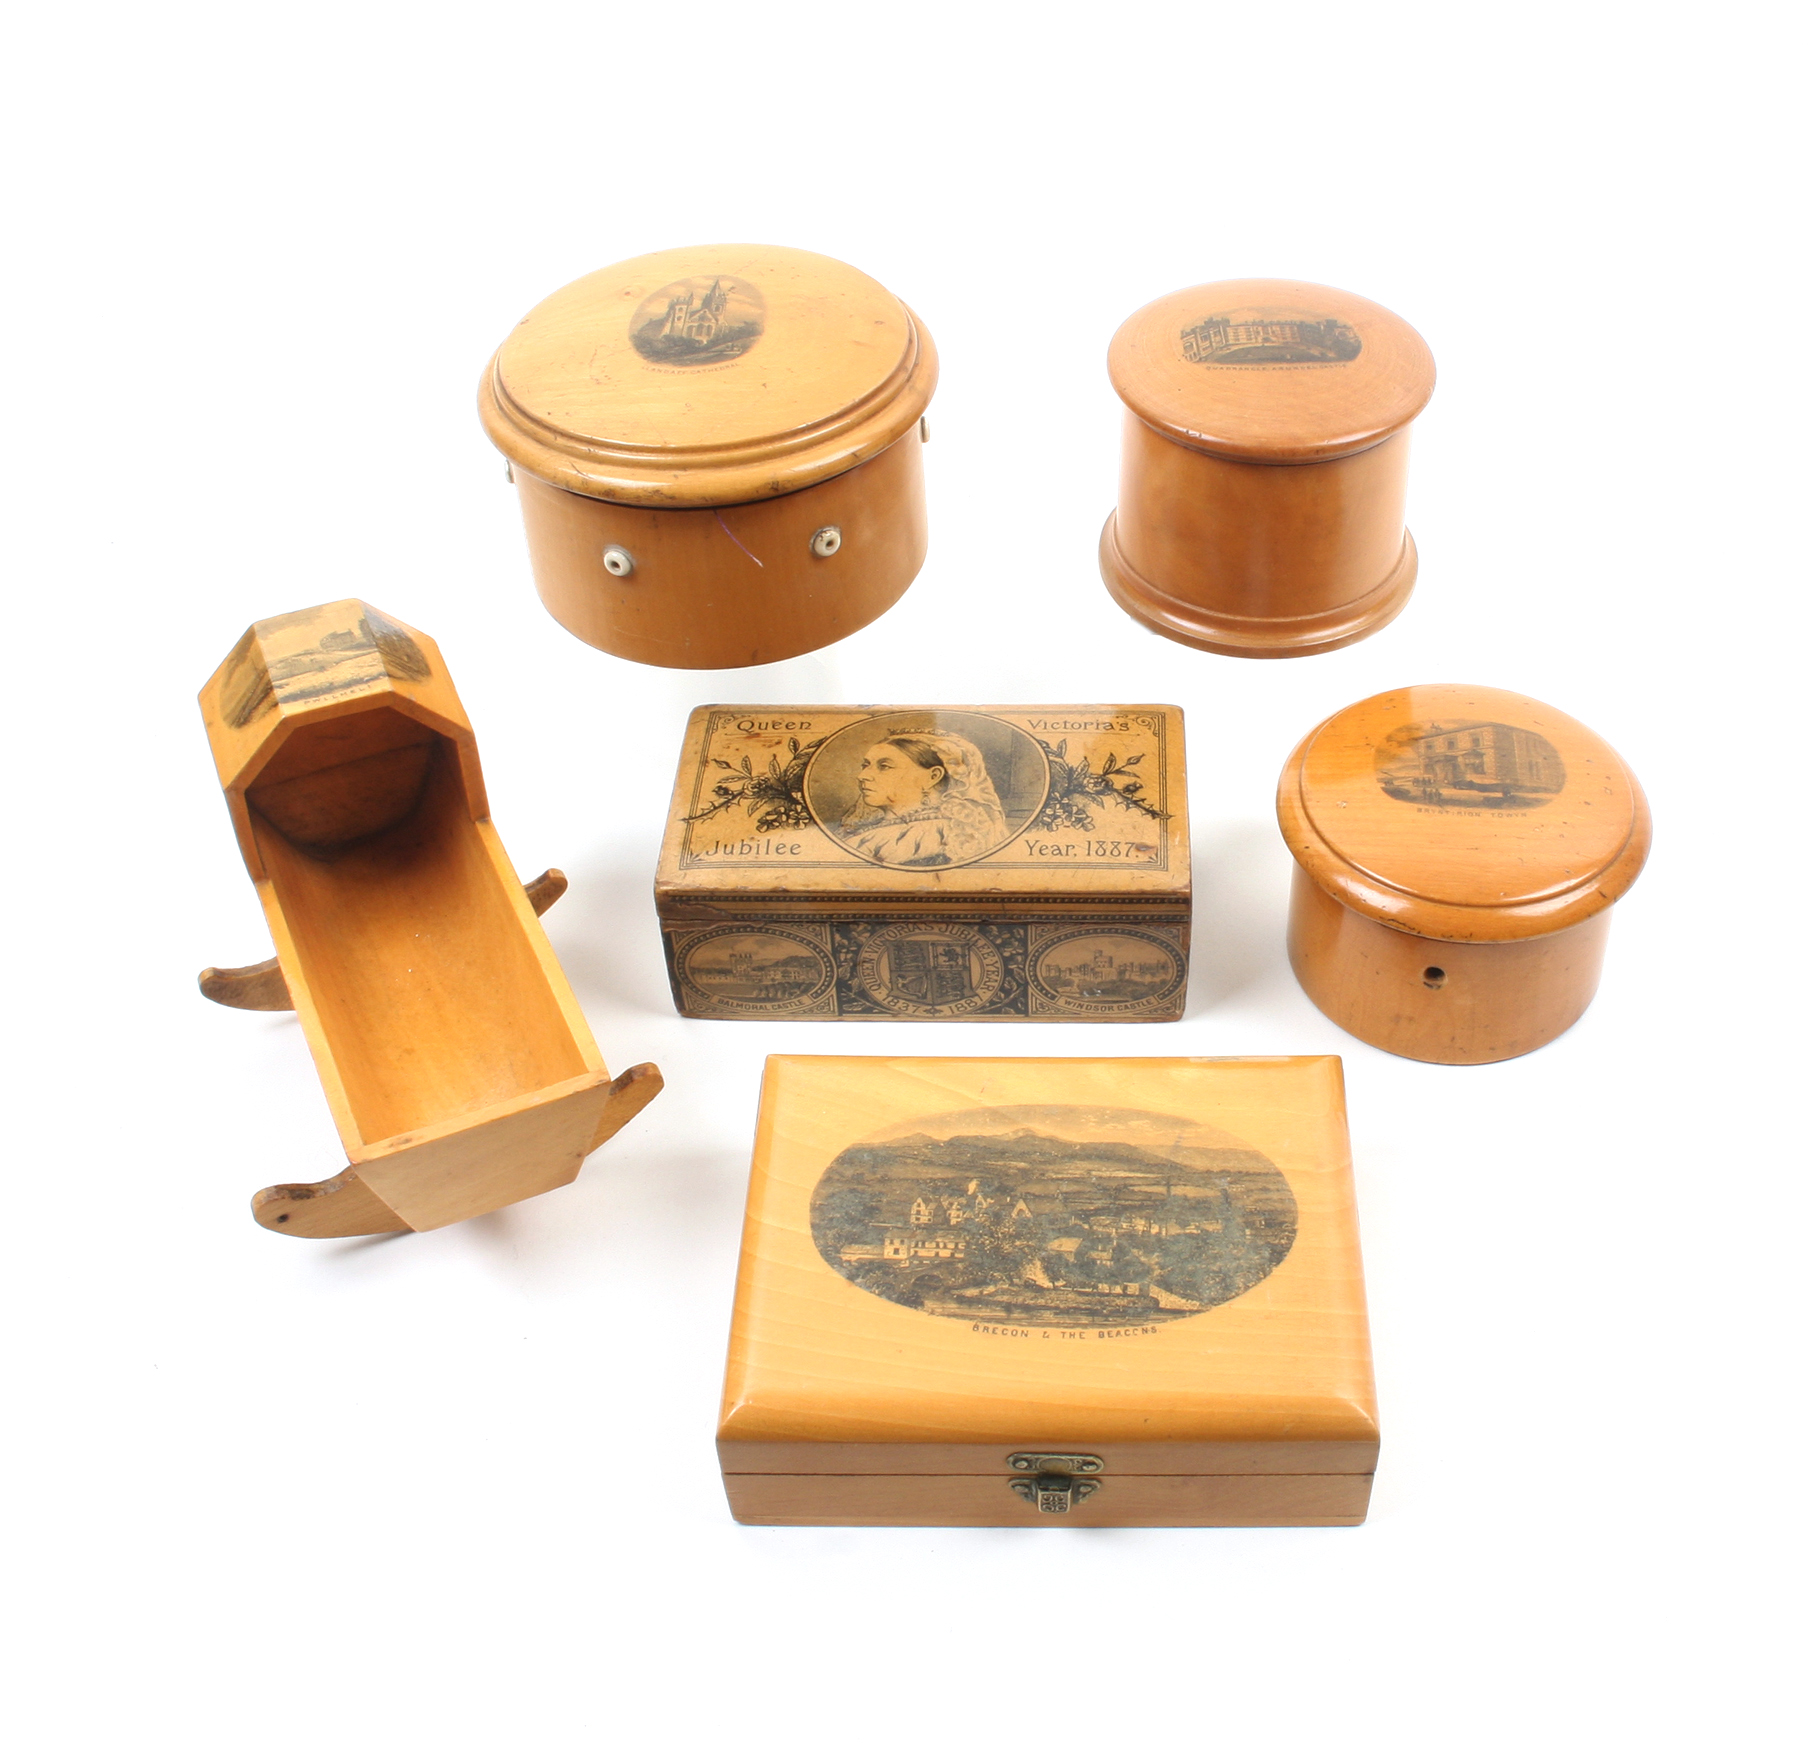 Mauchline ware _ sewing _ six pieces comprising a circular reel box, six bone side apertures, dome